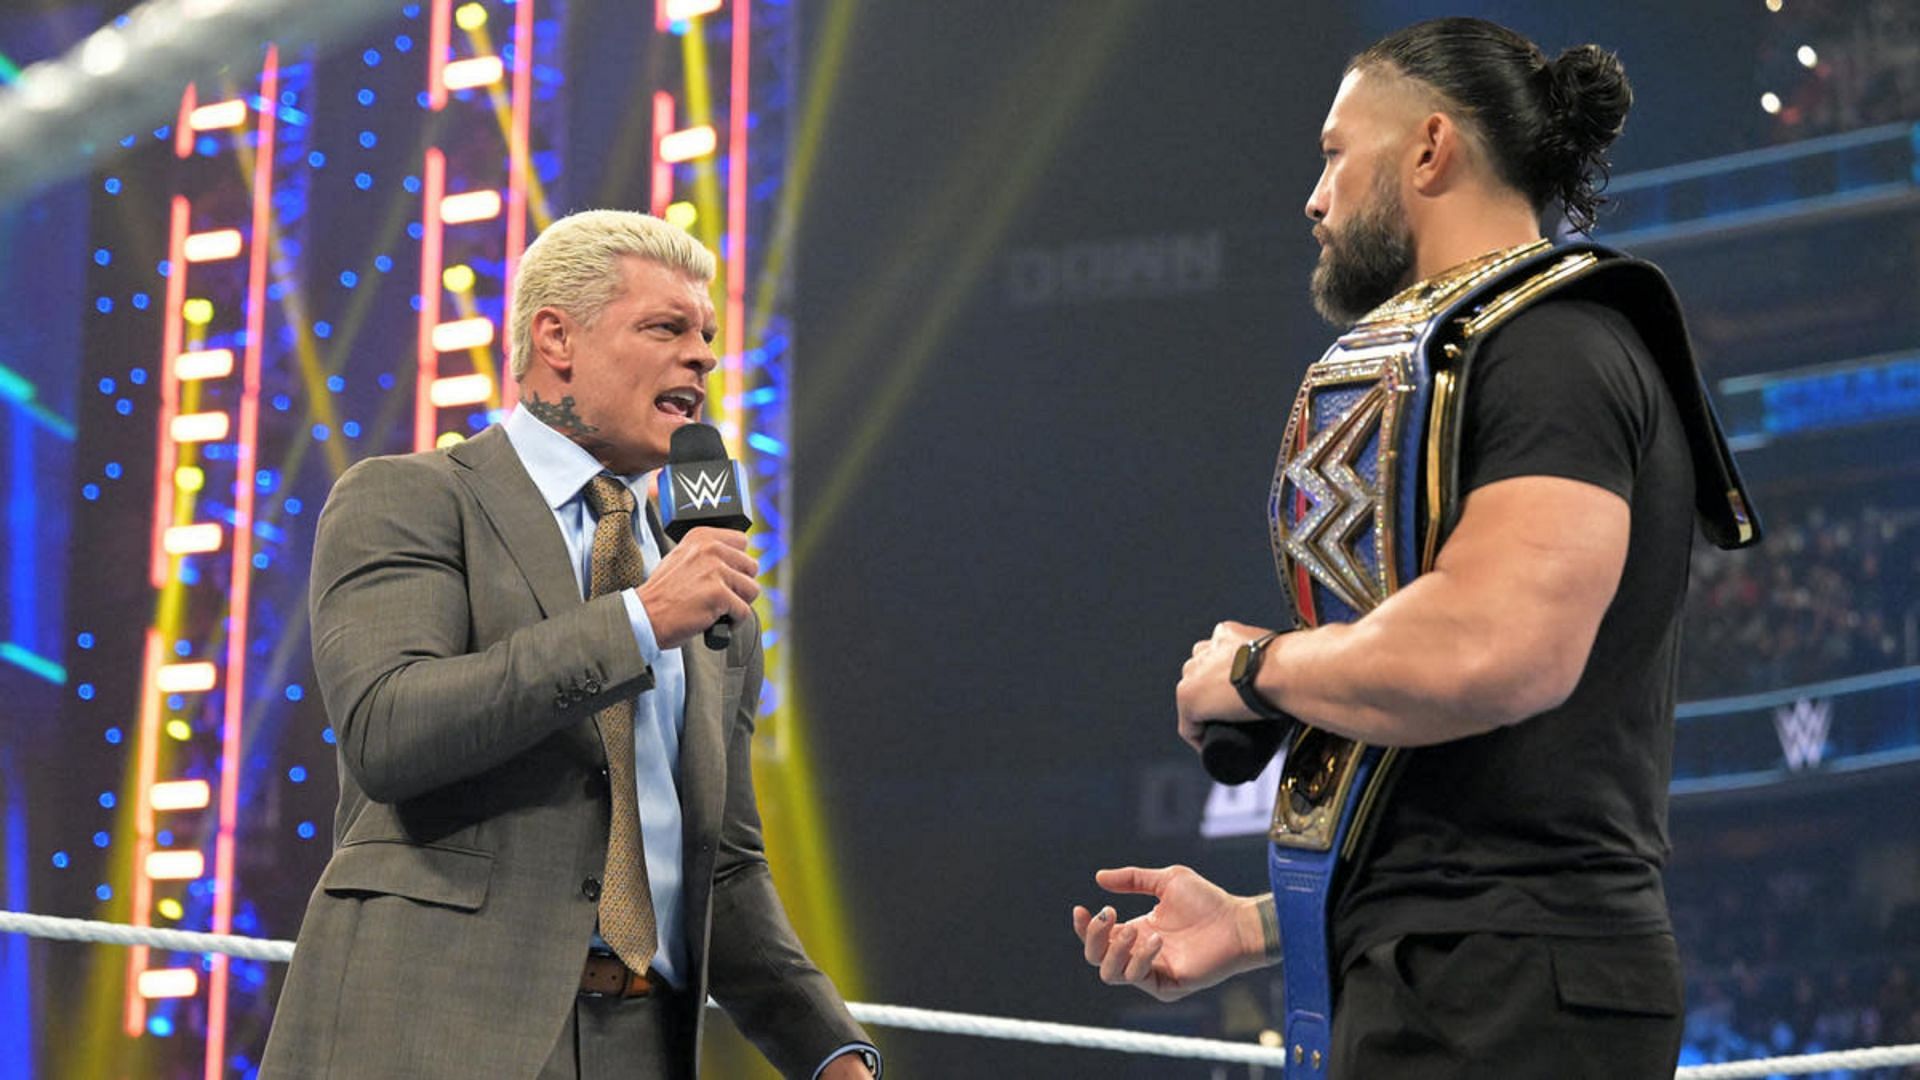 Cody Rhodes will challenge the Undisputed WWE Universal Champion Roman Reigns at WrestleMania